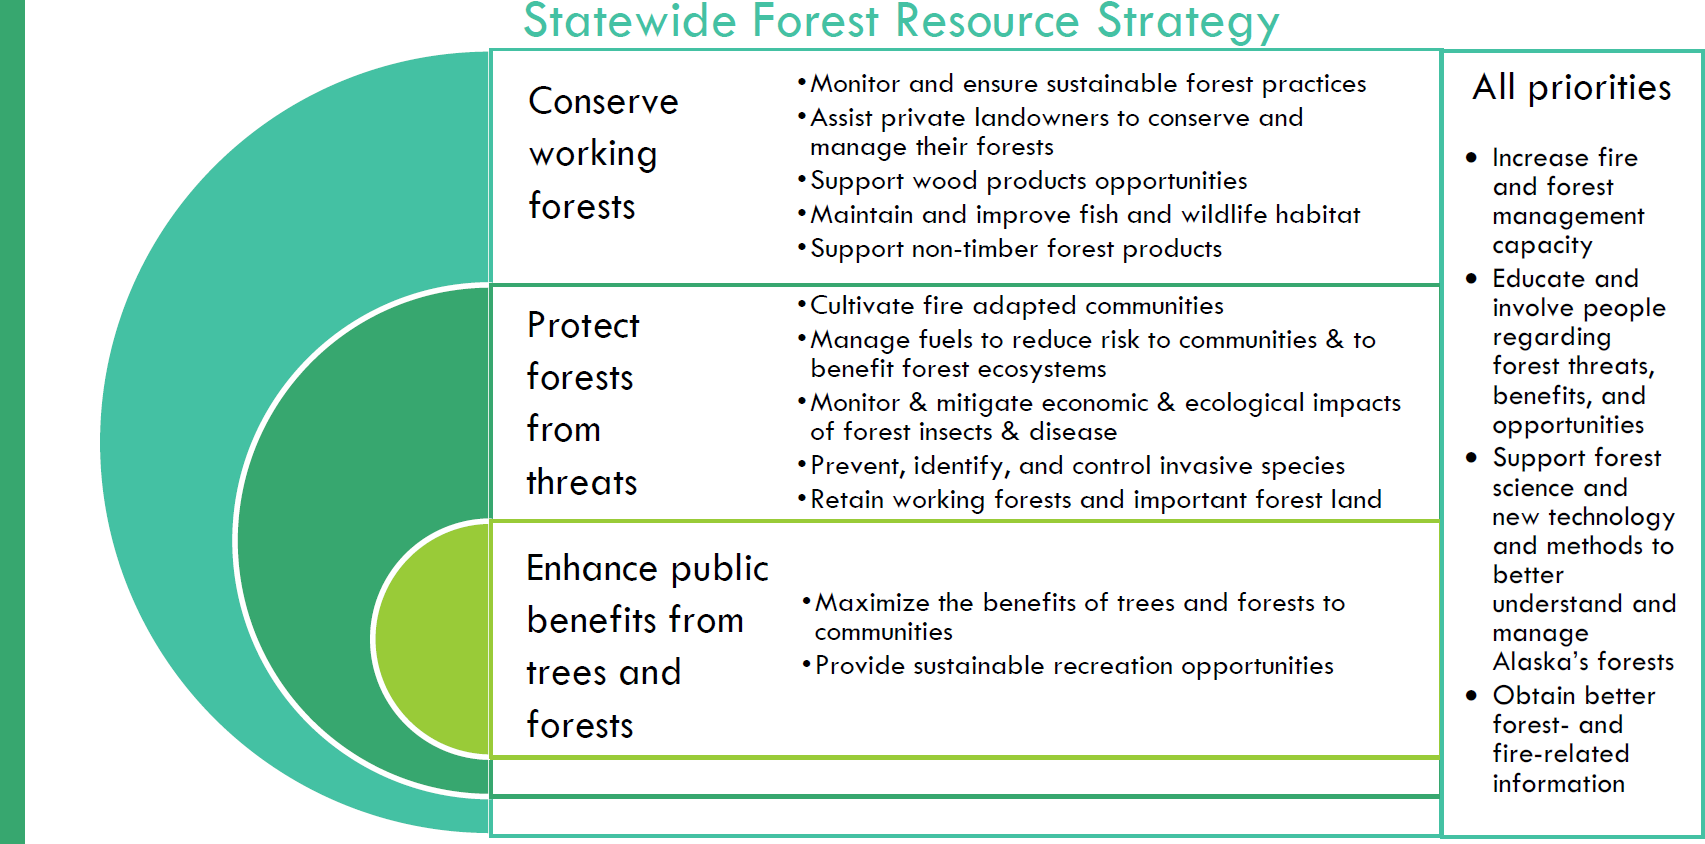 Statewide Forest Resource Strategy